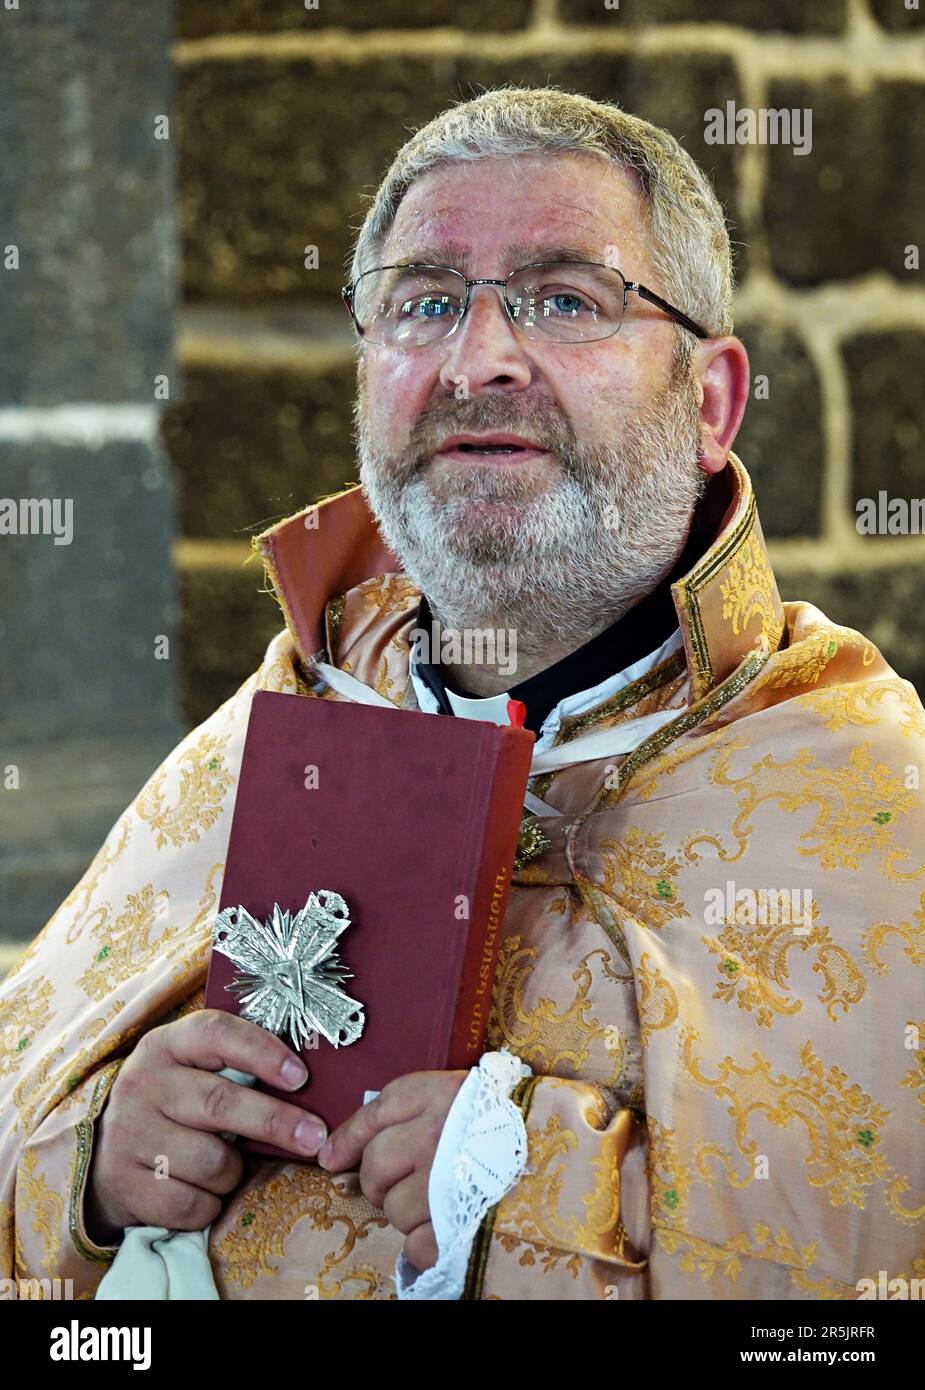 Senior Priest Abraham Firat seen preaching during the ritual at Diyarbak?r Surp Hovsep Church. At the Surp Hovsep Armenian Catholic Church, which was heavily damaged in clashes between armed Kurdish PKK militants and Turkish security forces in the center of Diyarbakir in 2015 and repaired as a result of a 4-year restoration, the second ritual in the last 100 years after the first ritual in 2021. Very few Armenians who came from Istanbul and lived in Diyarbakir attended the ceremony. The ritual was led by Senior Priest Abraham Firat and Subordinate Deacon Jan Acemoglu, who were ordained from Is Stock Photo